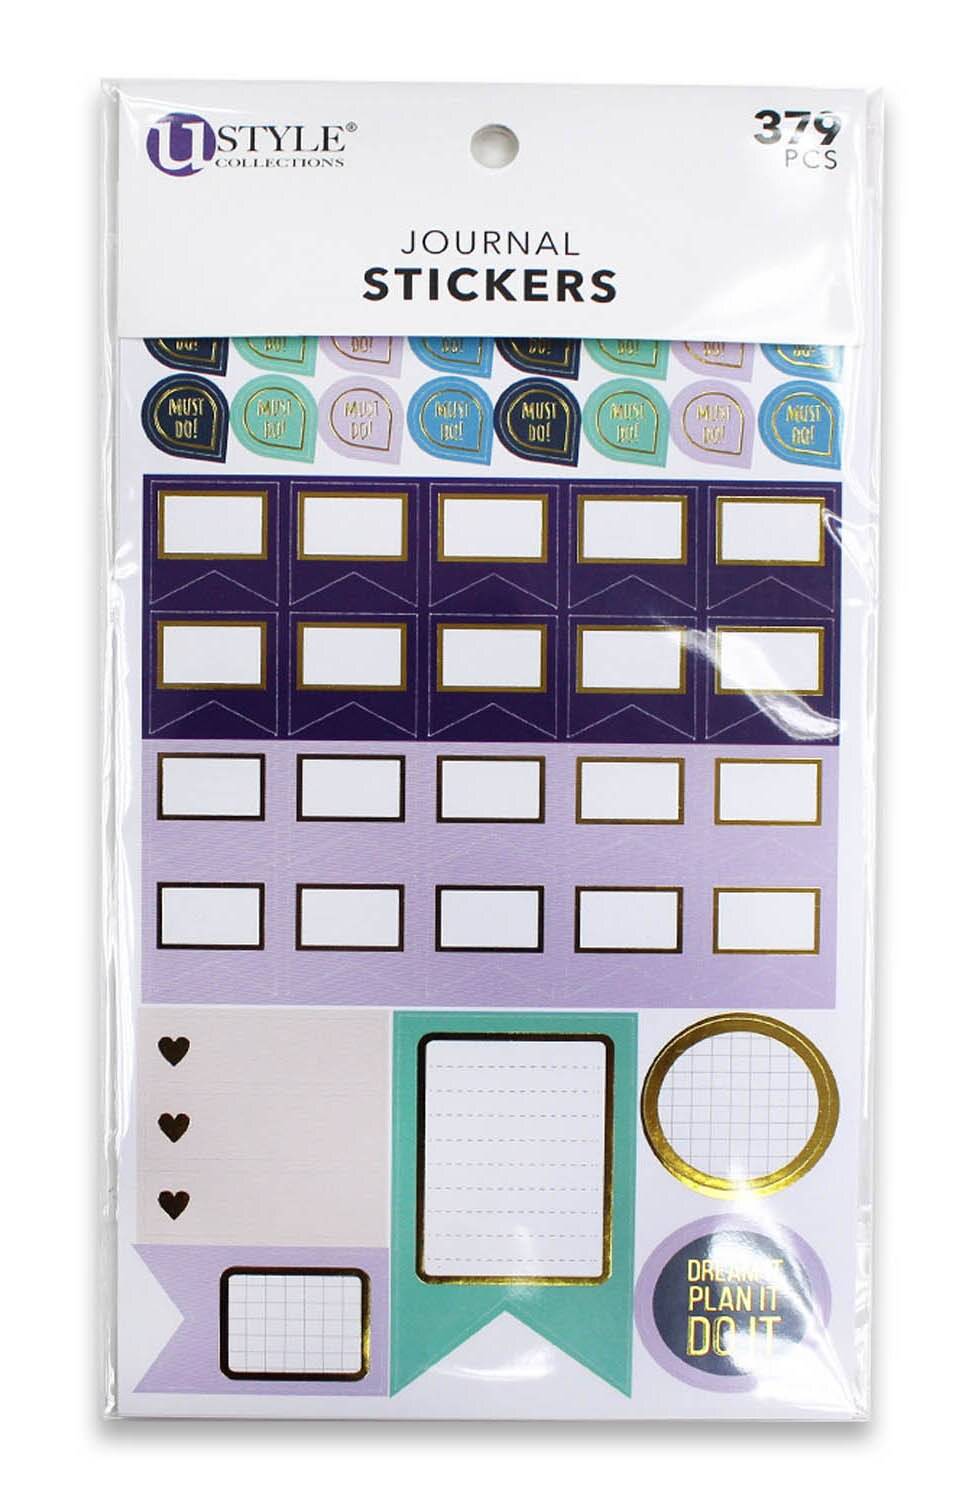 U Style Collections Journal Stickers, 379 CT